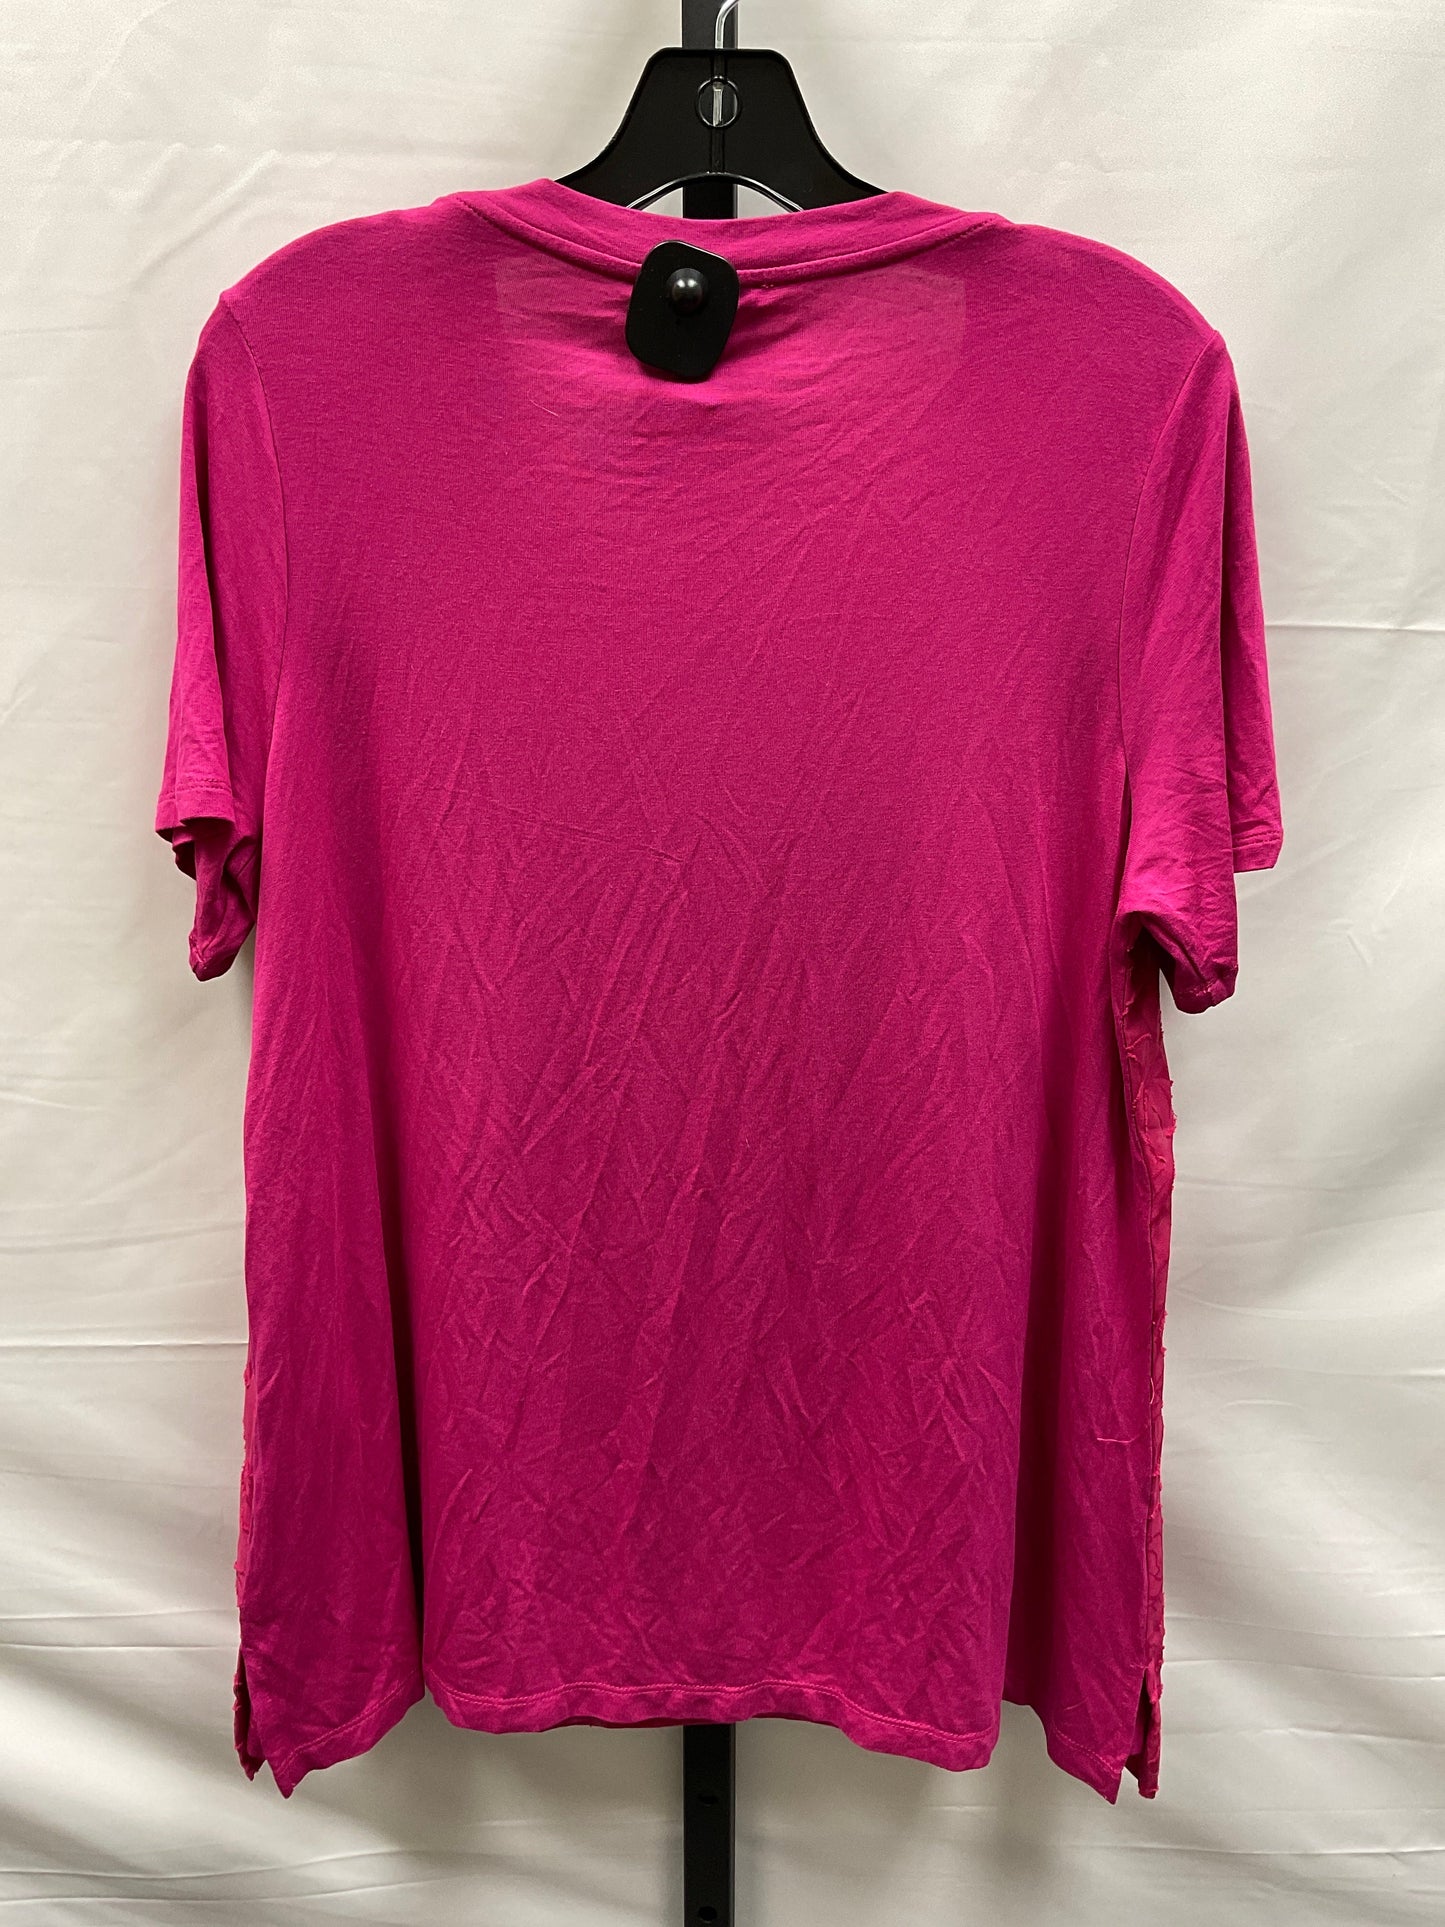 Pink Top Short Sleeve Rxb, Size M